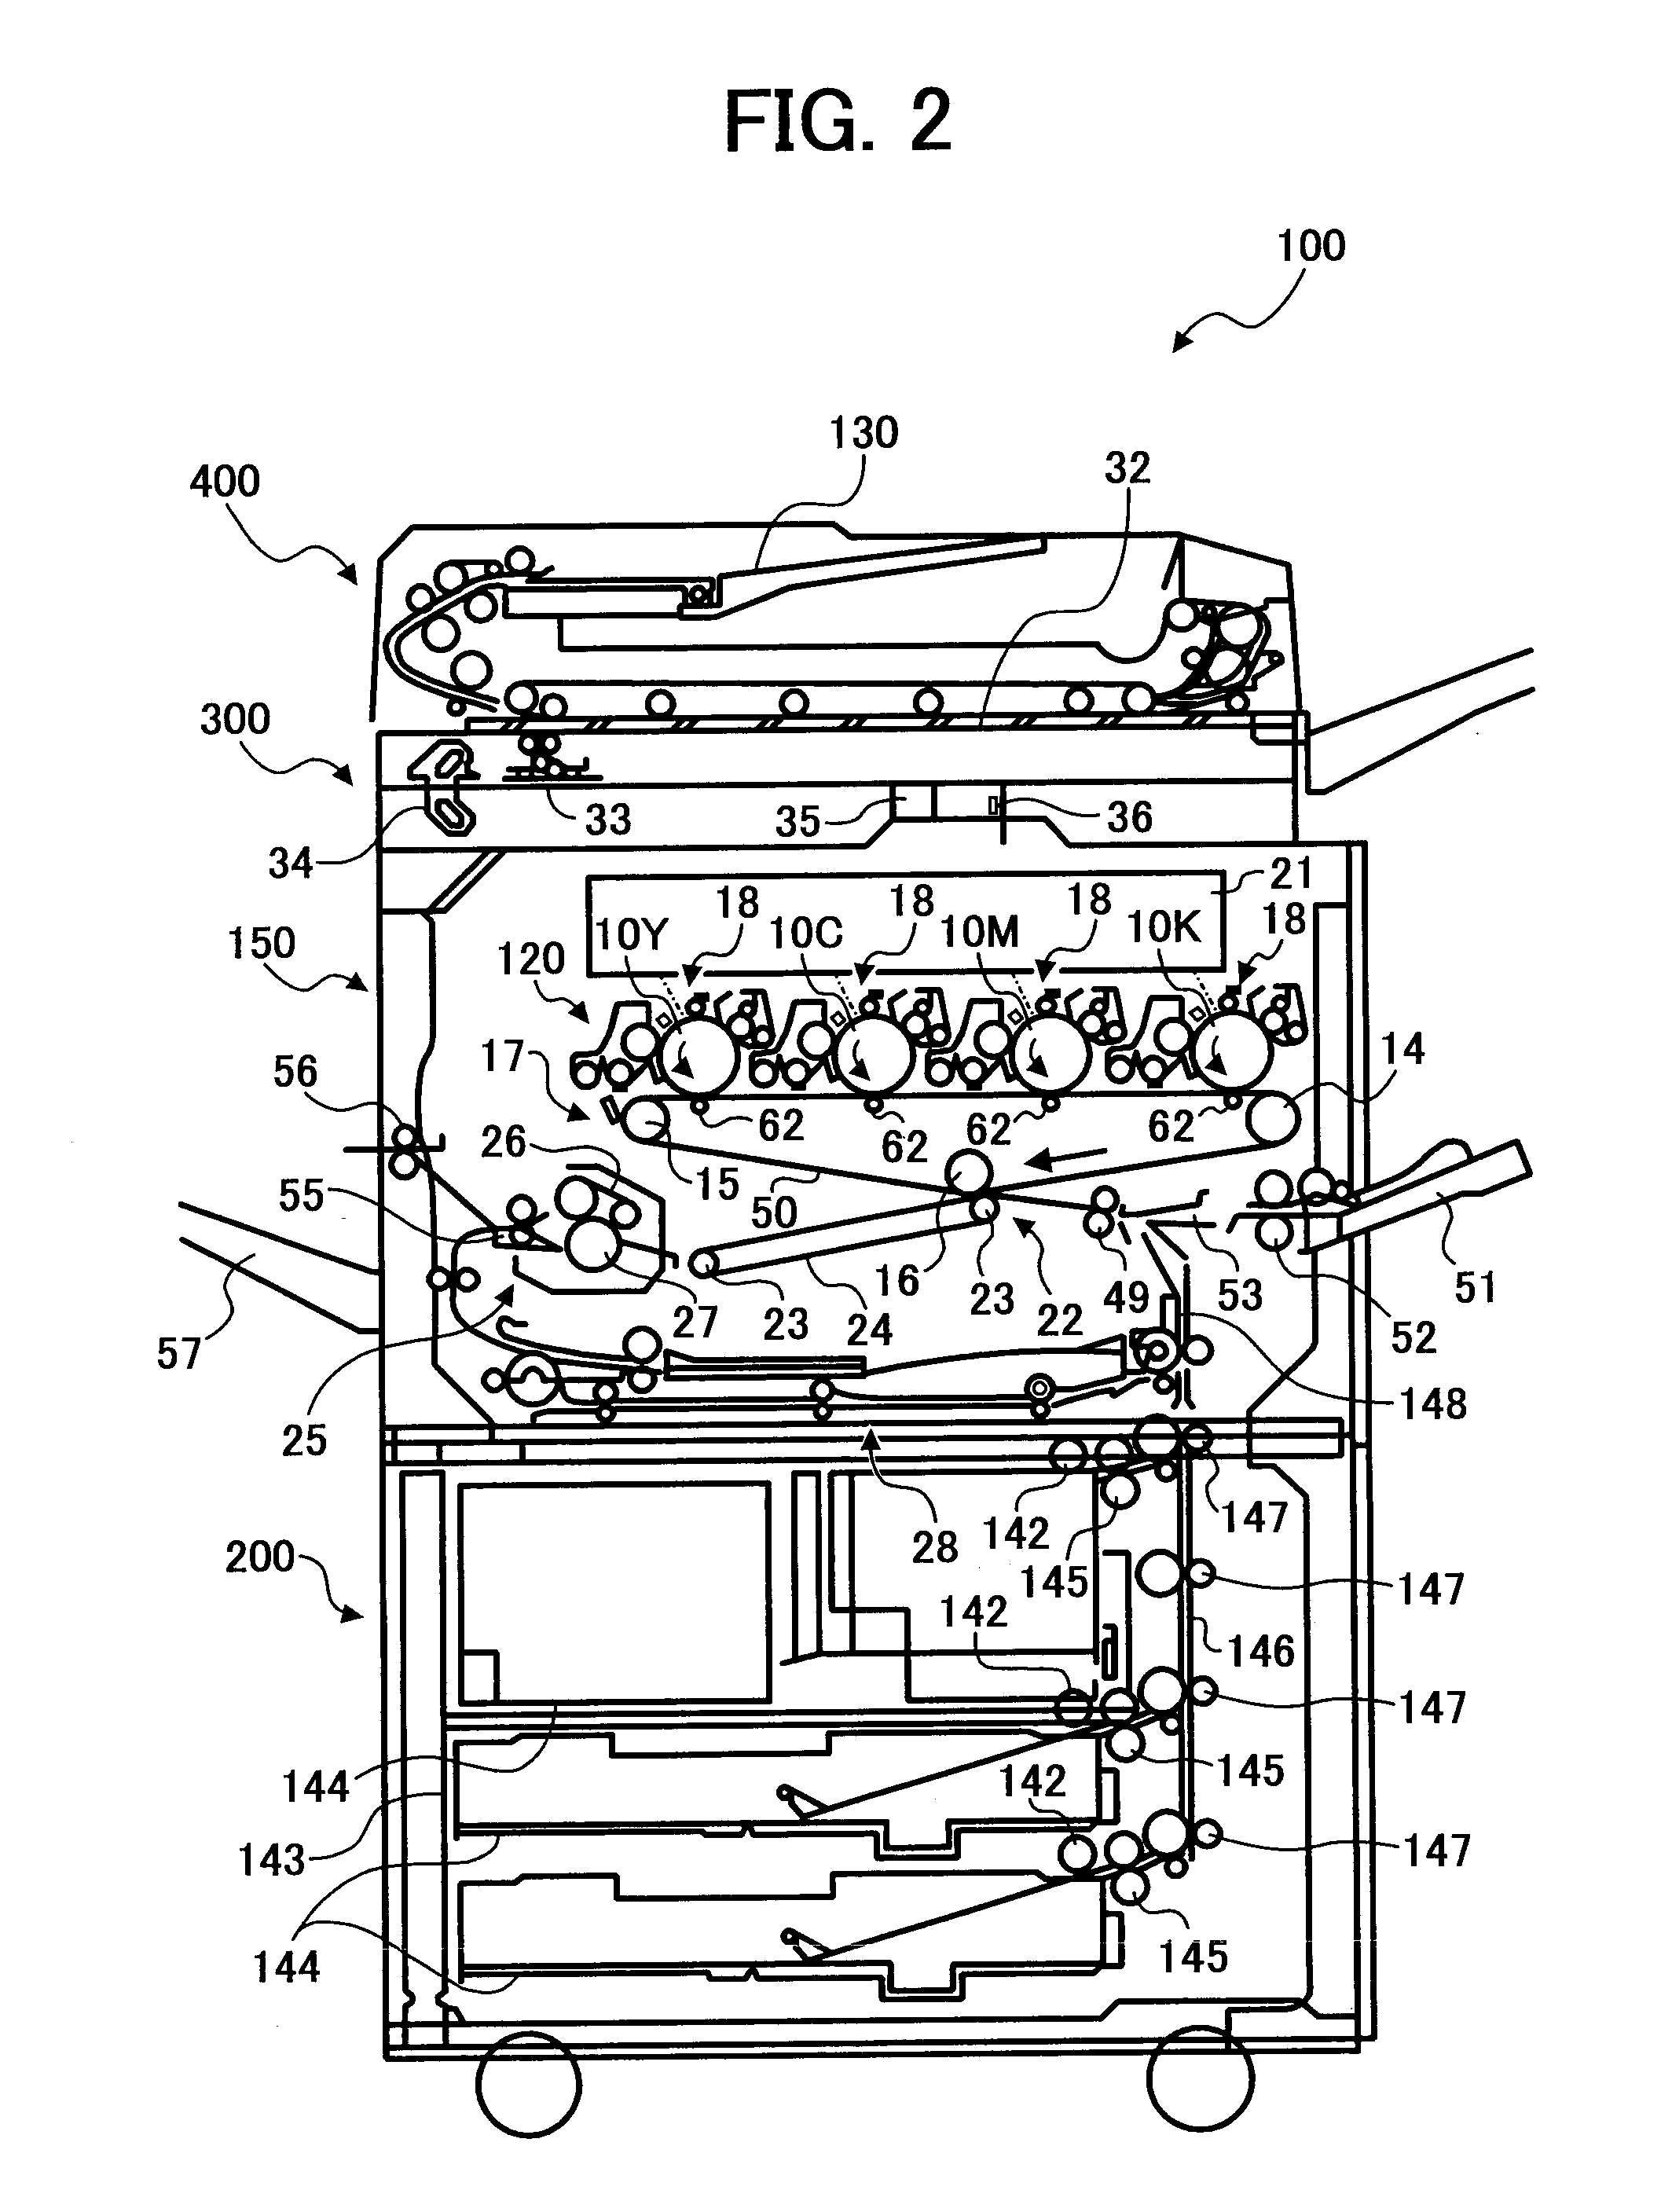 Toner and image forming method using the toner